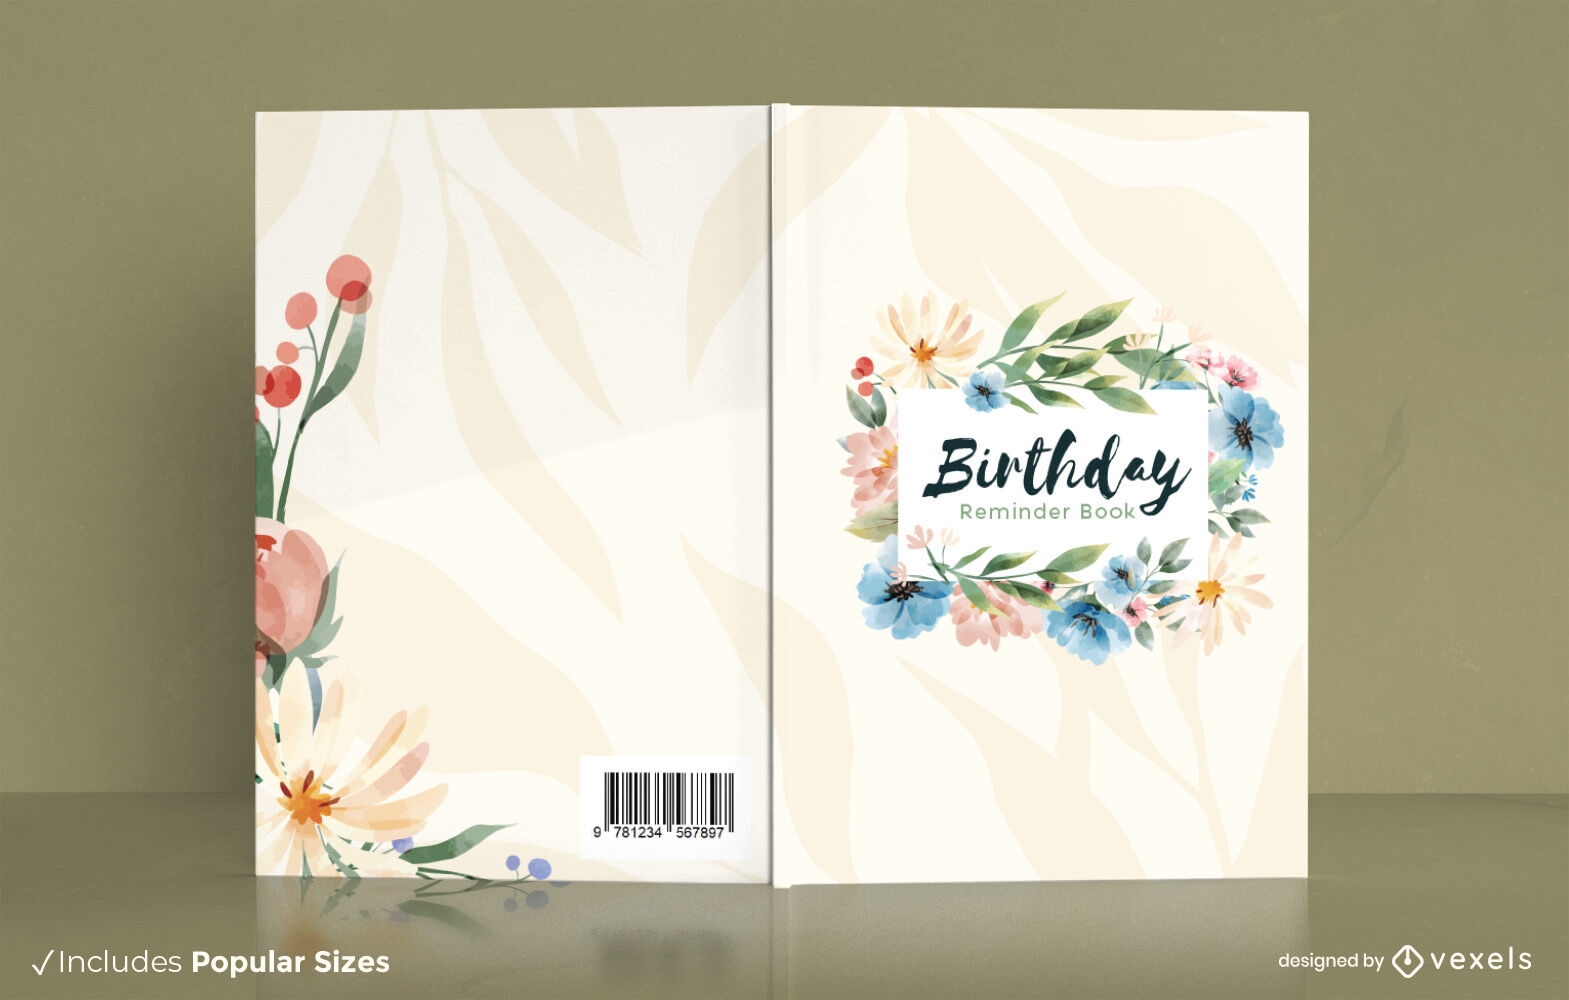 Watercolor flowers birthday book cover design